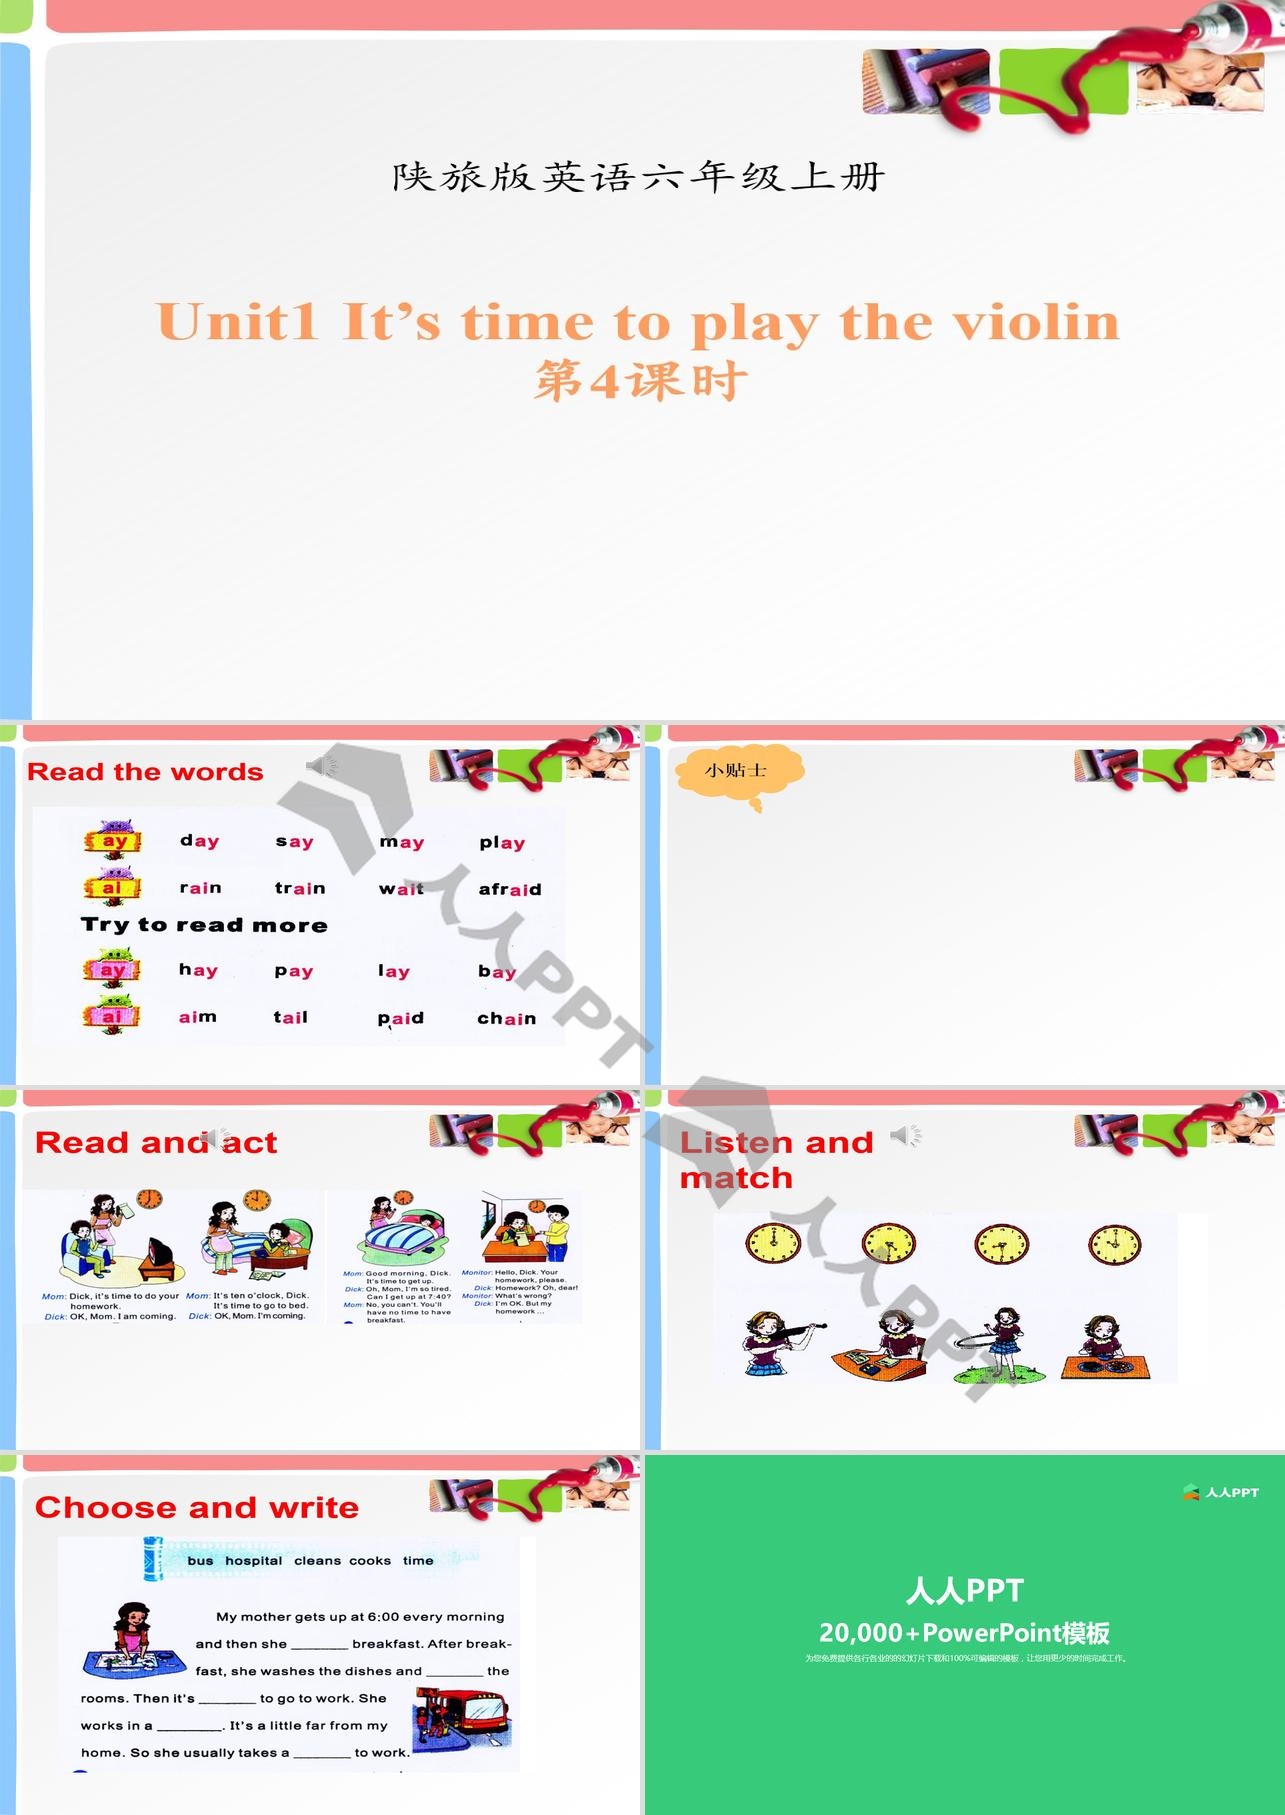 《It's Time to Play the Violin》PPT课件下载长图